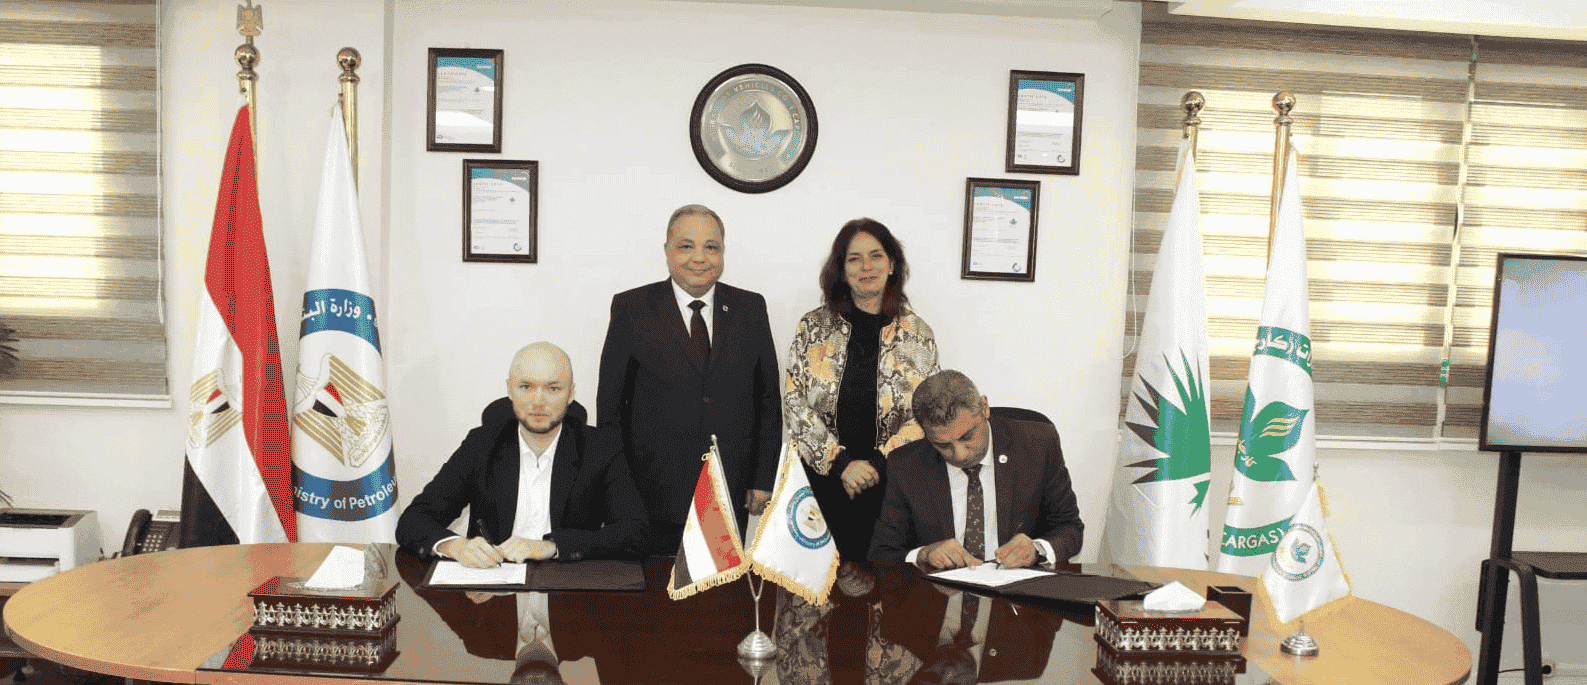 Cargas, InDrive join forces to drive natural gas vehicle conversion in Egypt

